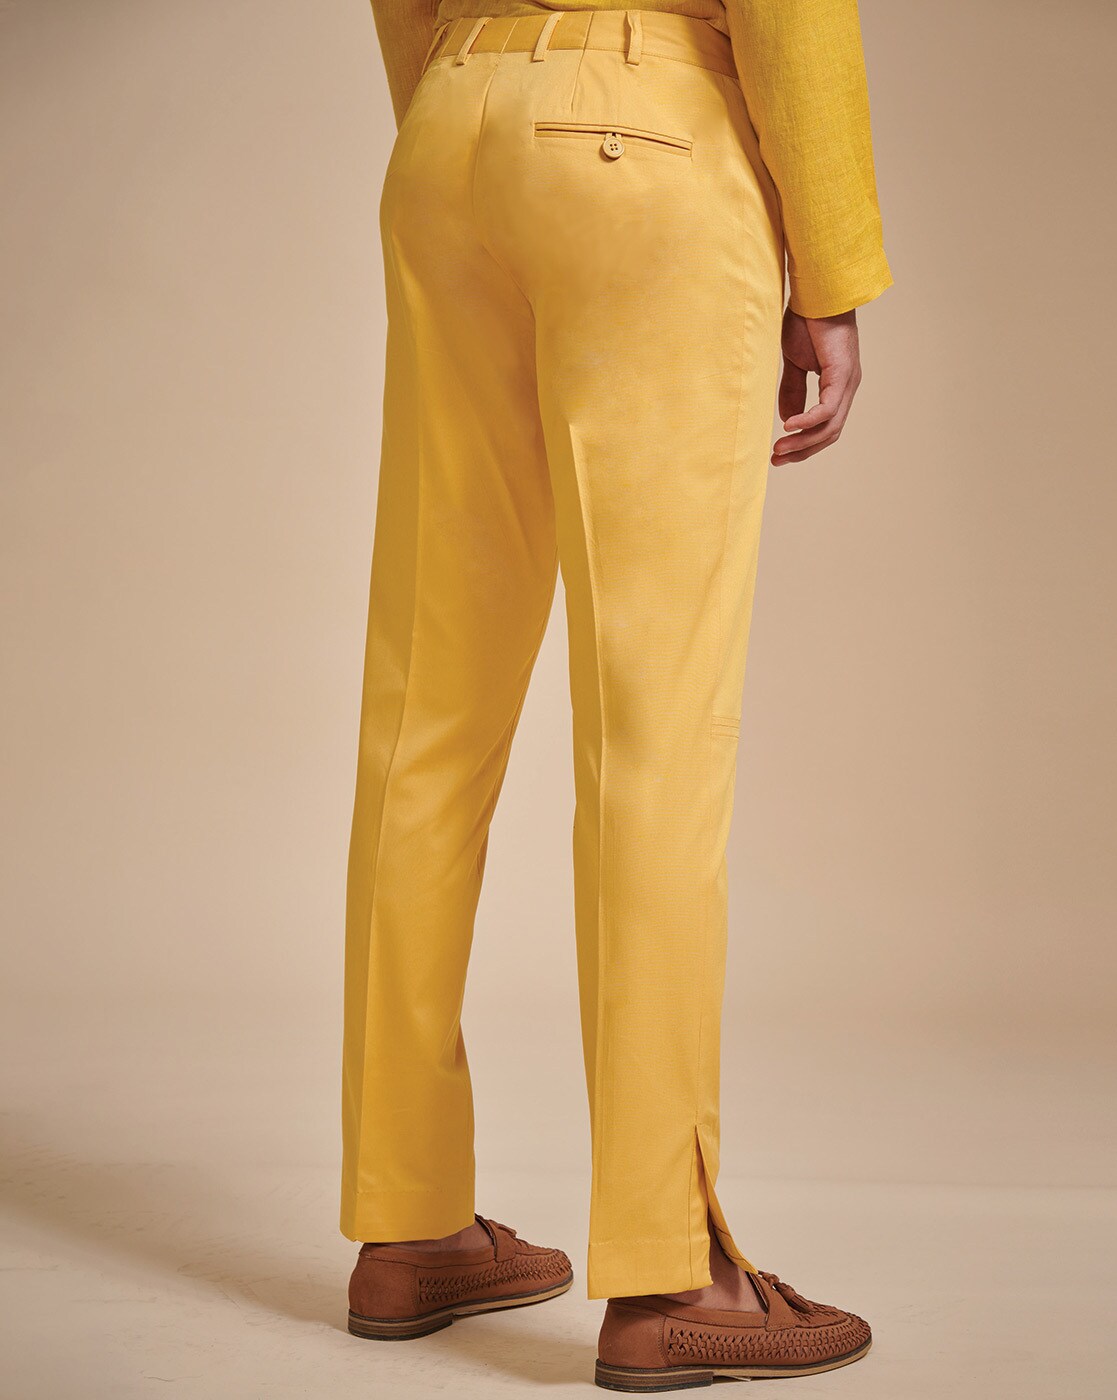 Goldenrod Yellow Corduroy Trousers - Stancliffe Flat-Front in 8-Wale Cotton